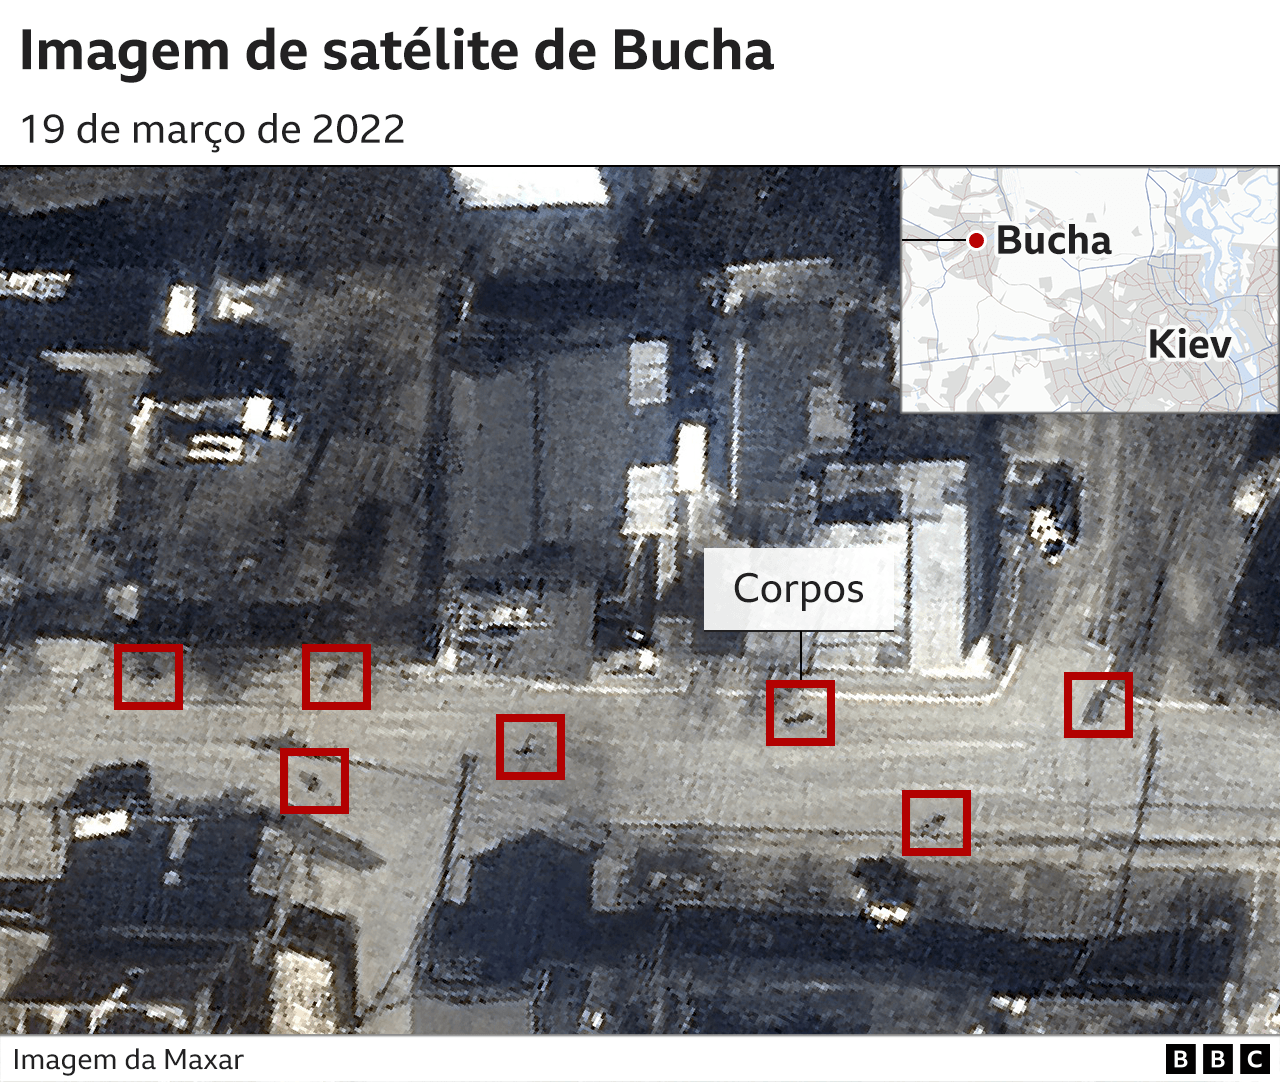 Satellite images show bodies in Pucha